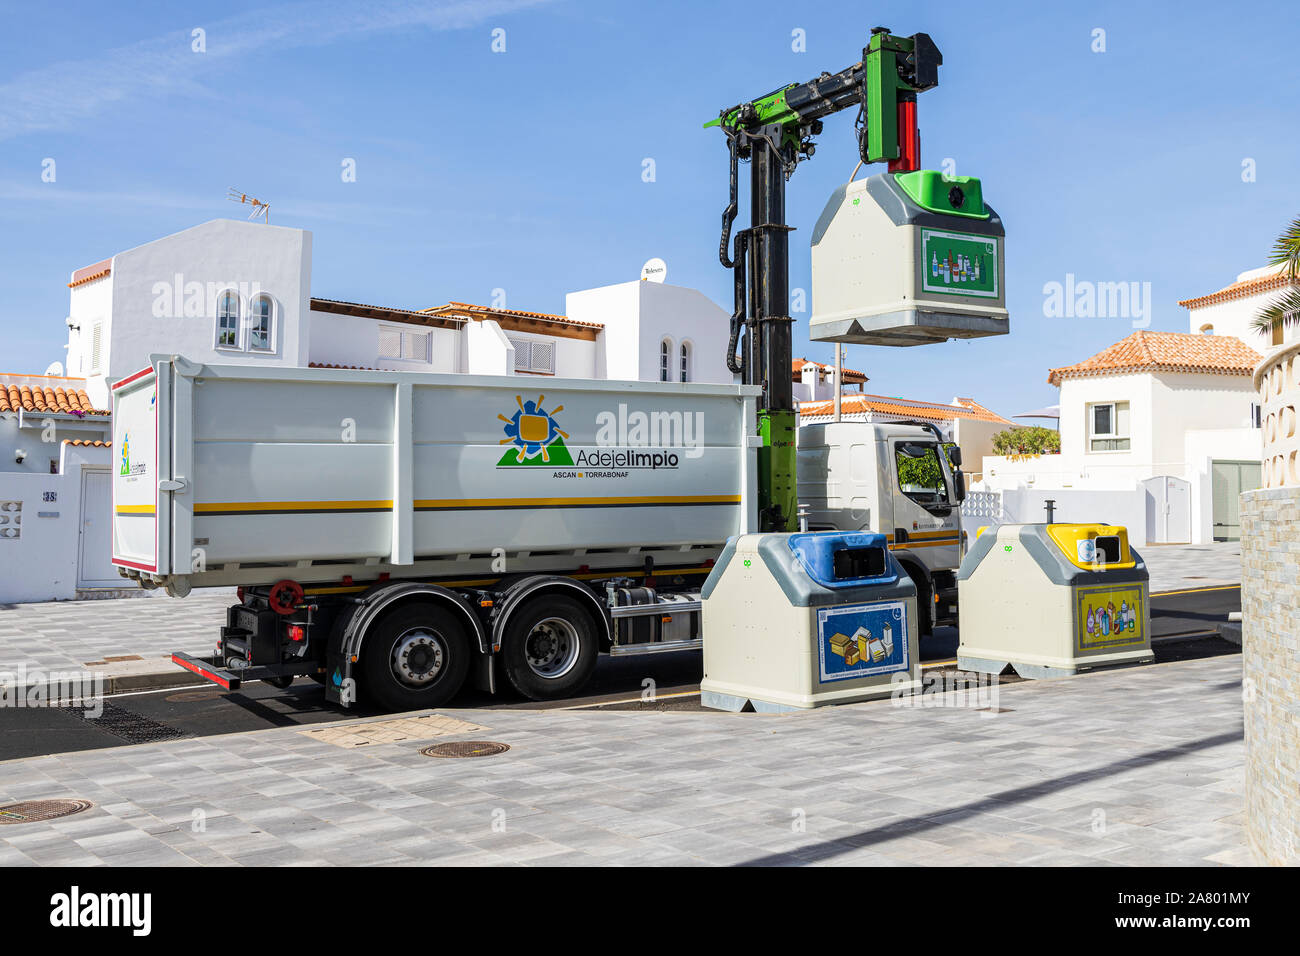 Refuse truck collecting recycled glass from containers by the roadside in La Caleta, Costa Adeje, Tenerife, Canary Islands, Spain Stock Photo